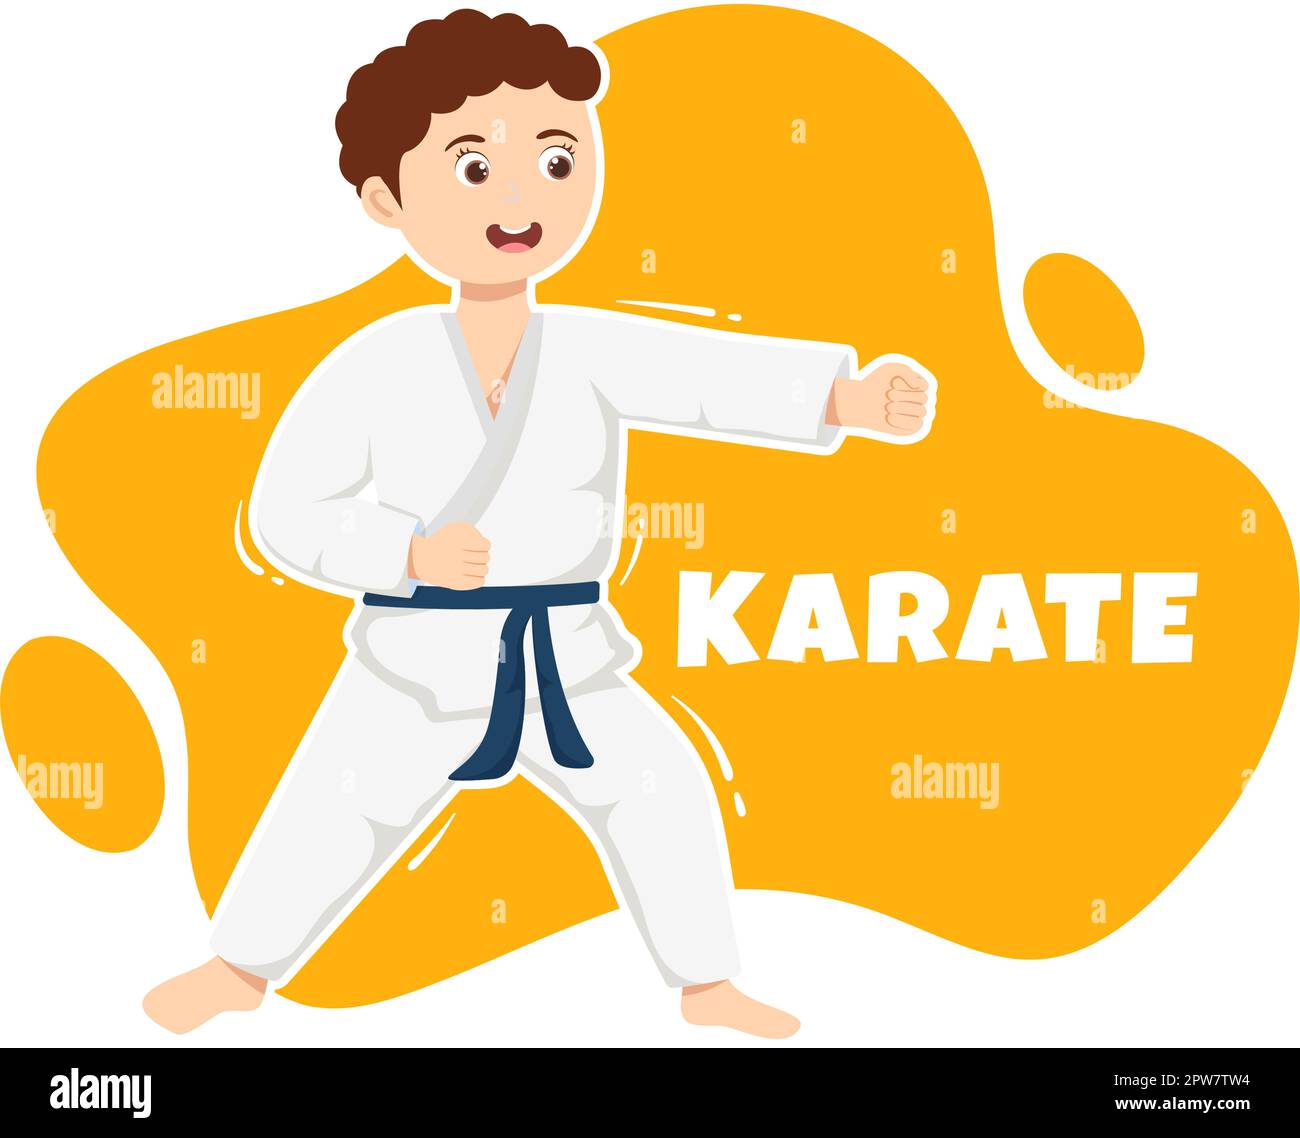 Kids Doing Some Basic Karate Martial Arts Moves, Fighting Pose and Wearing Kimono in Cartoon Hand Drawn for Landing Page Templates Illustration Stock Vector